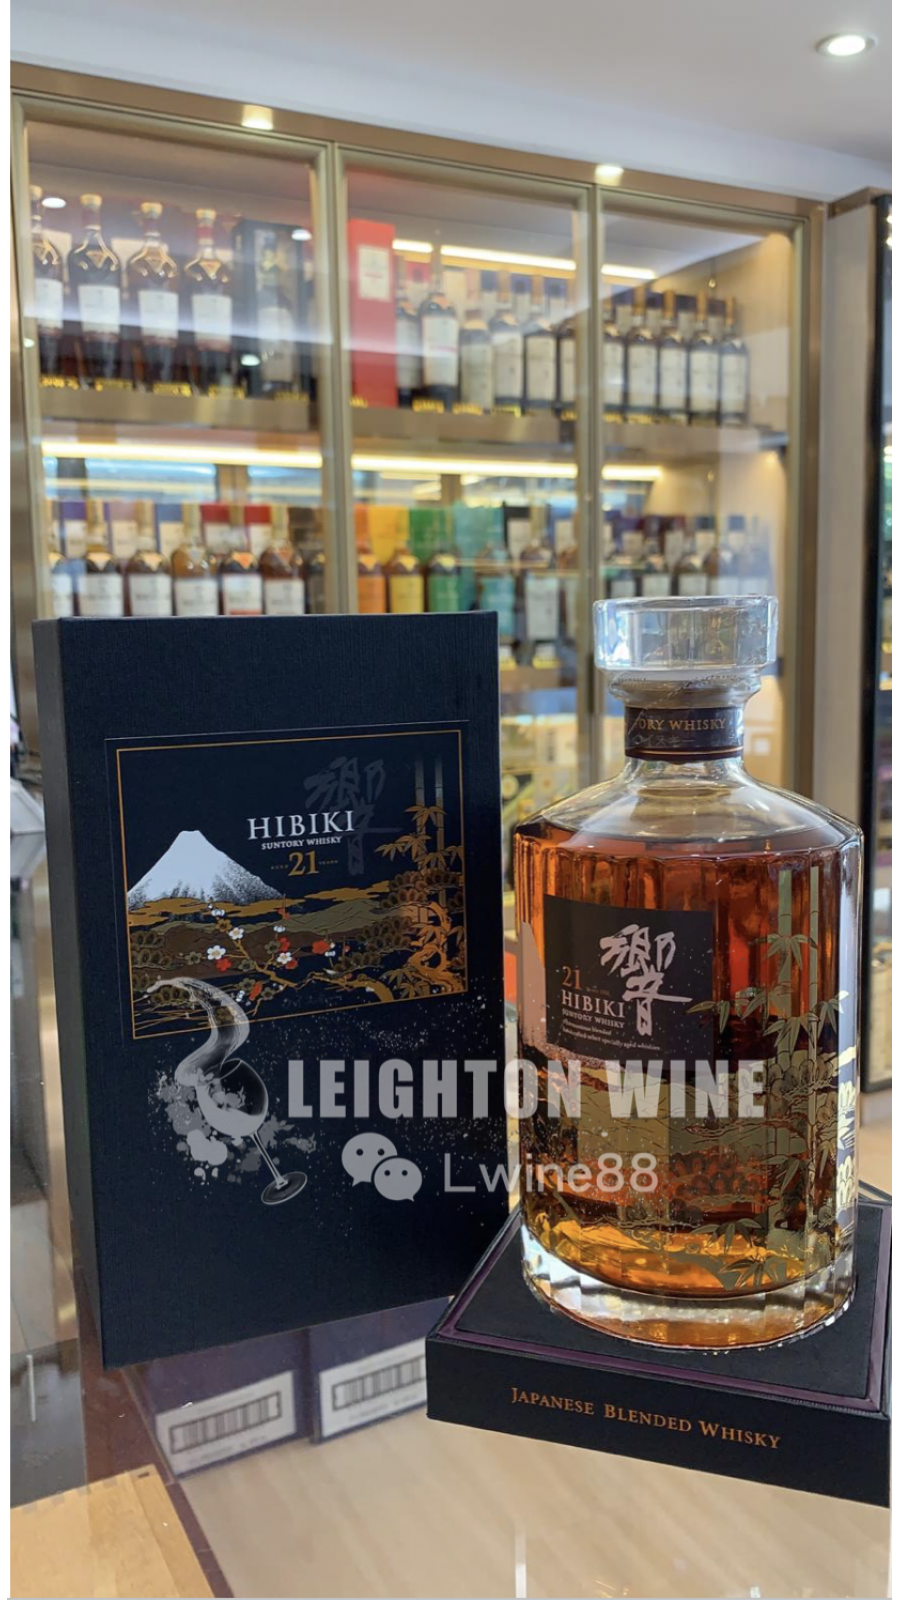 Hibiki 21 Year Old Whisky Limited Edition Duty Free Release